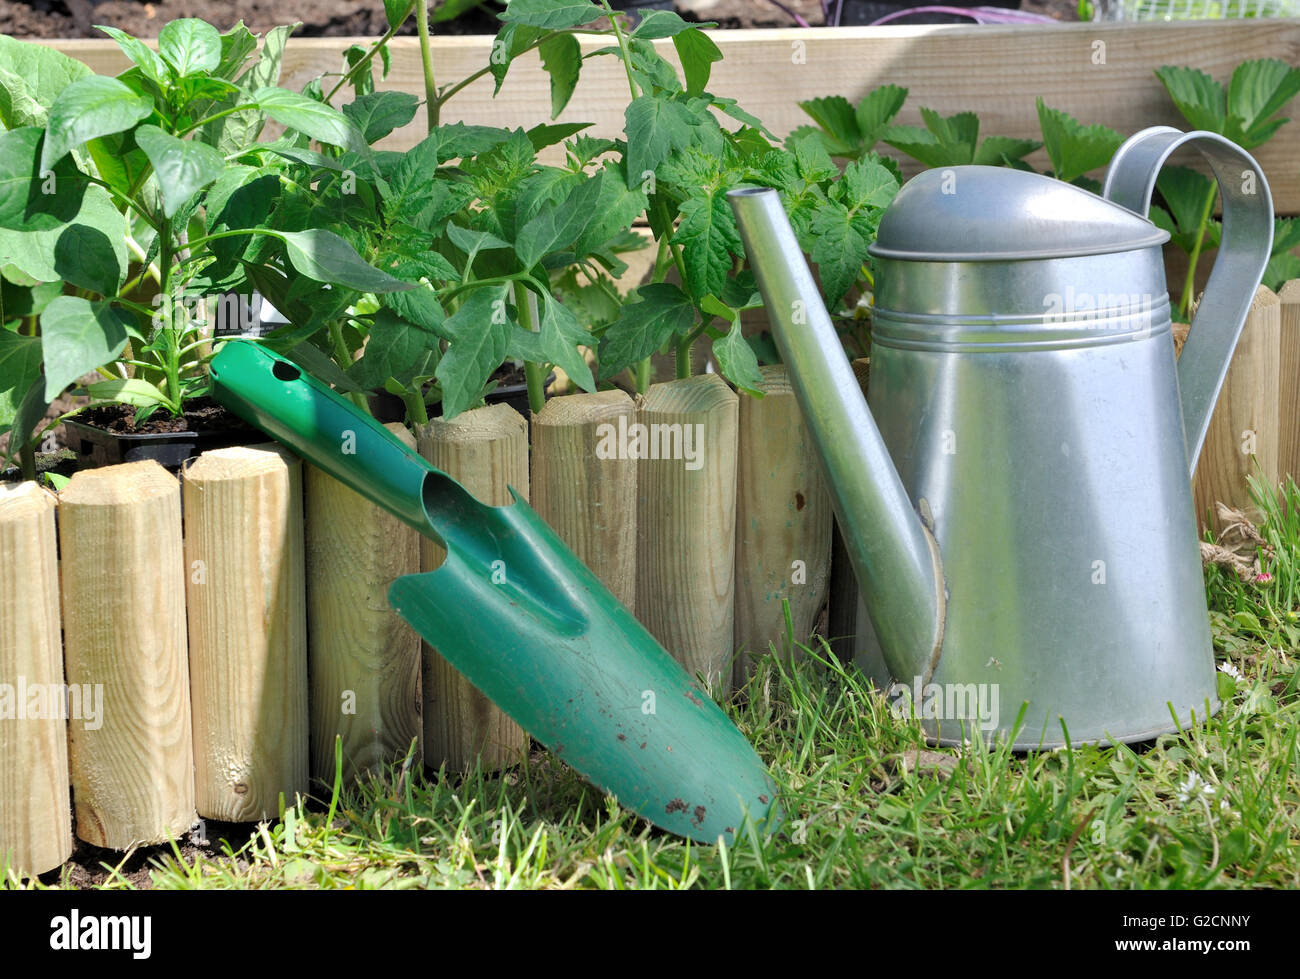 shovel and watering can against a wooden edge of a garden Stock Photo